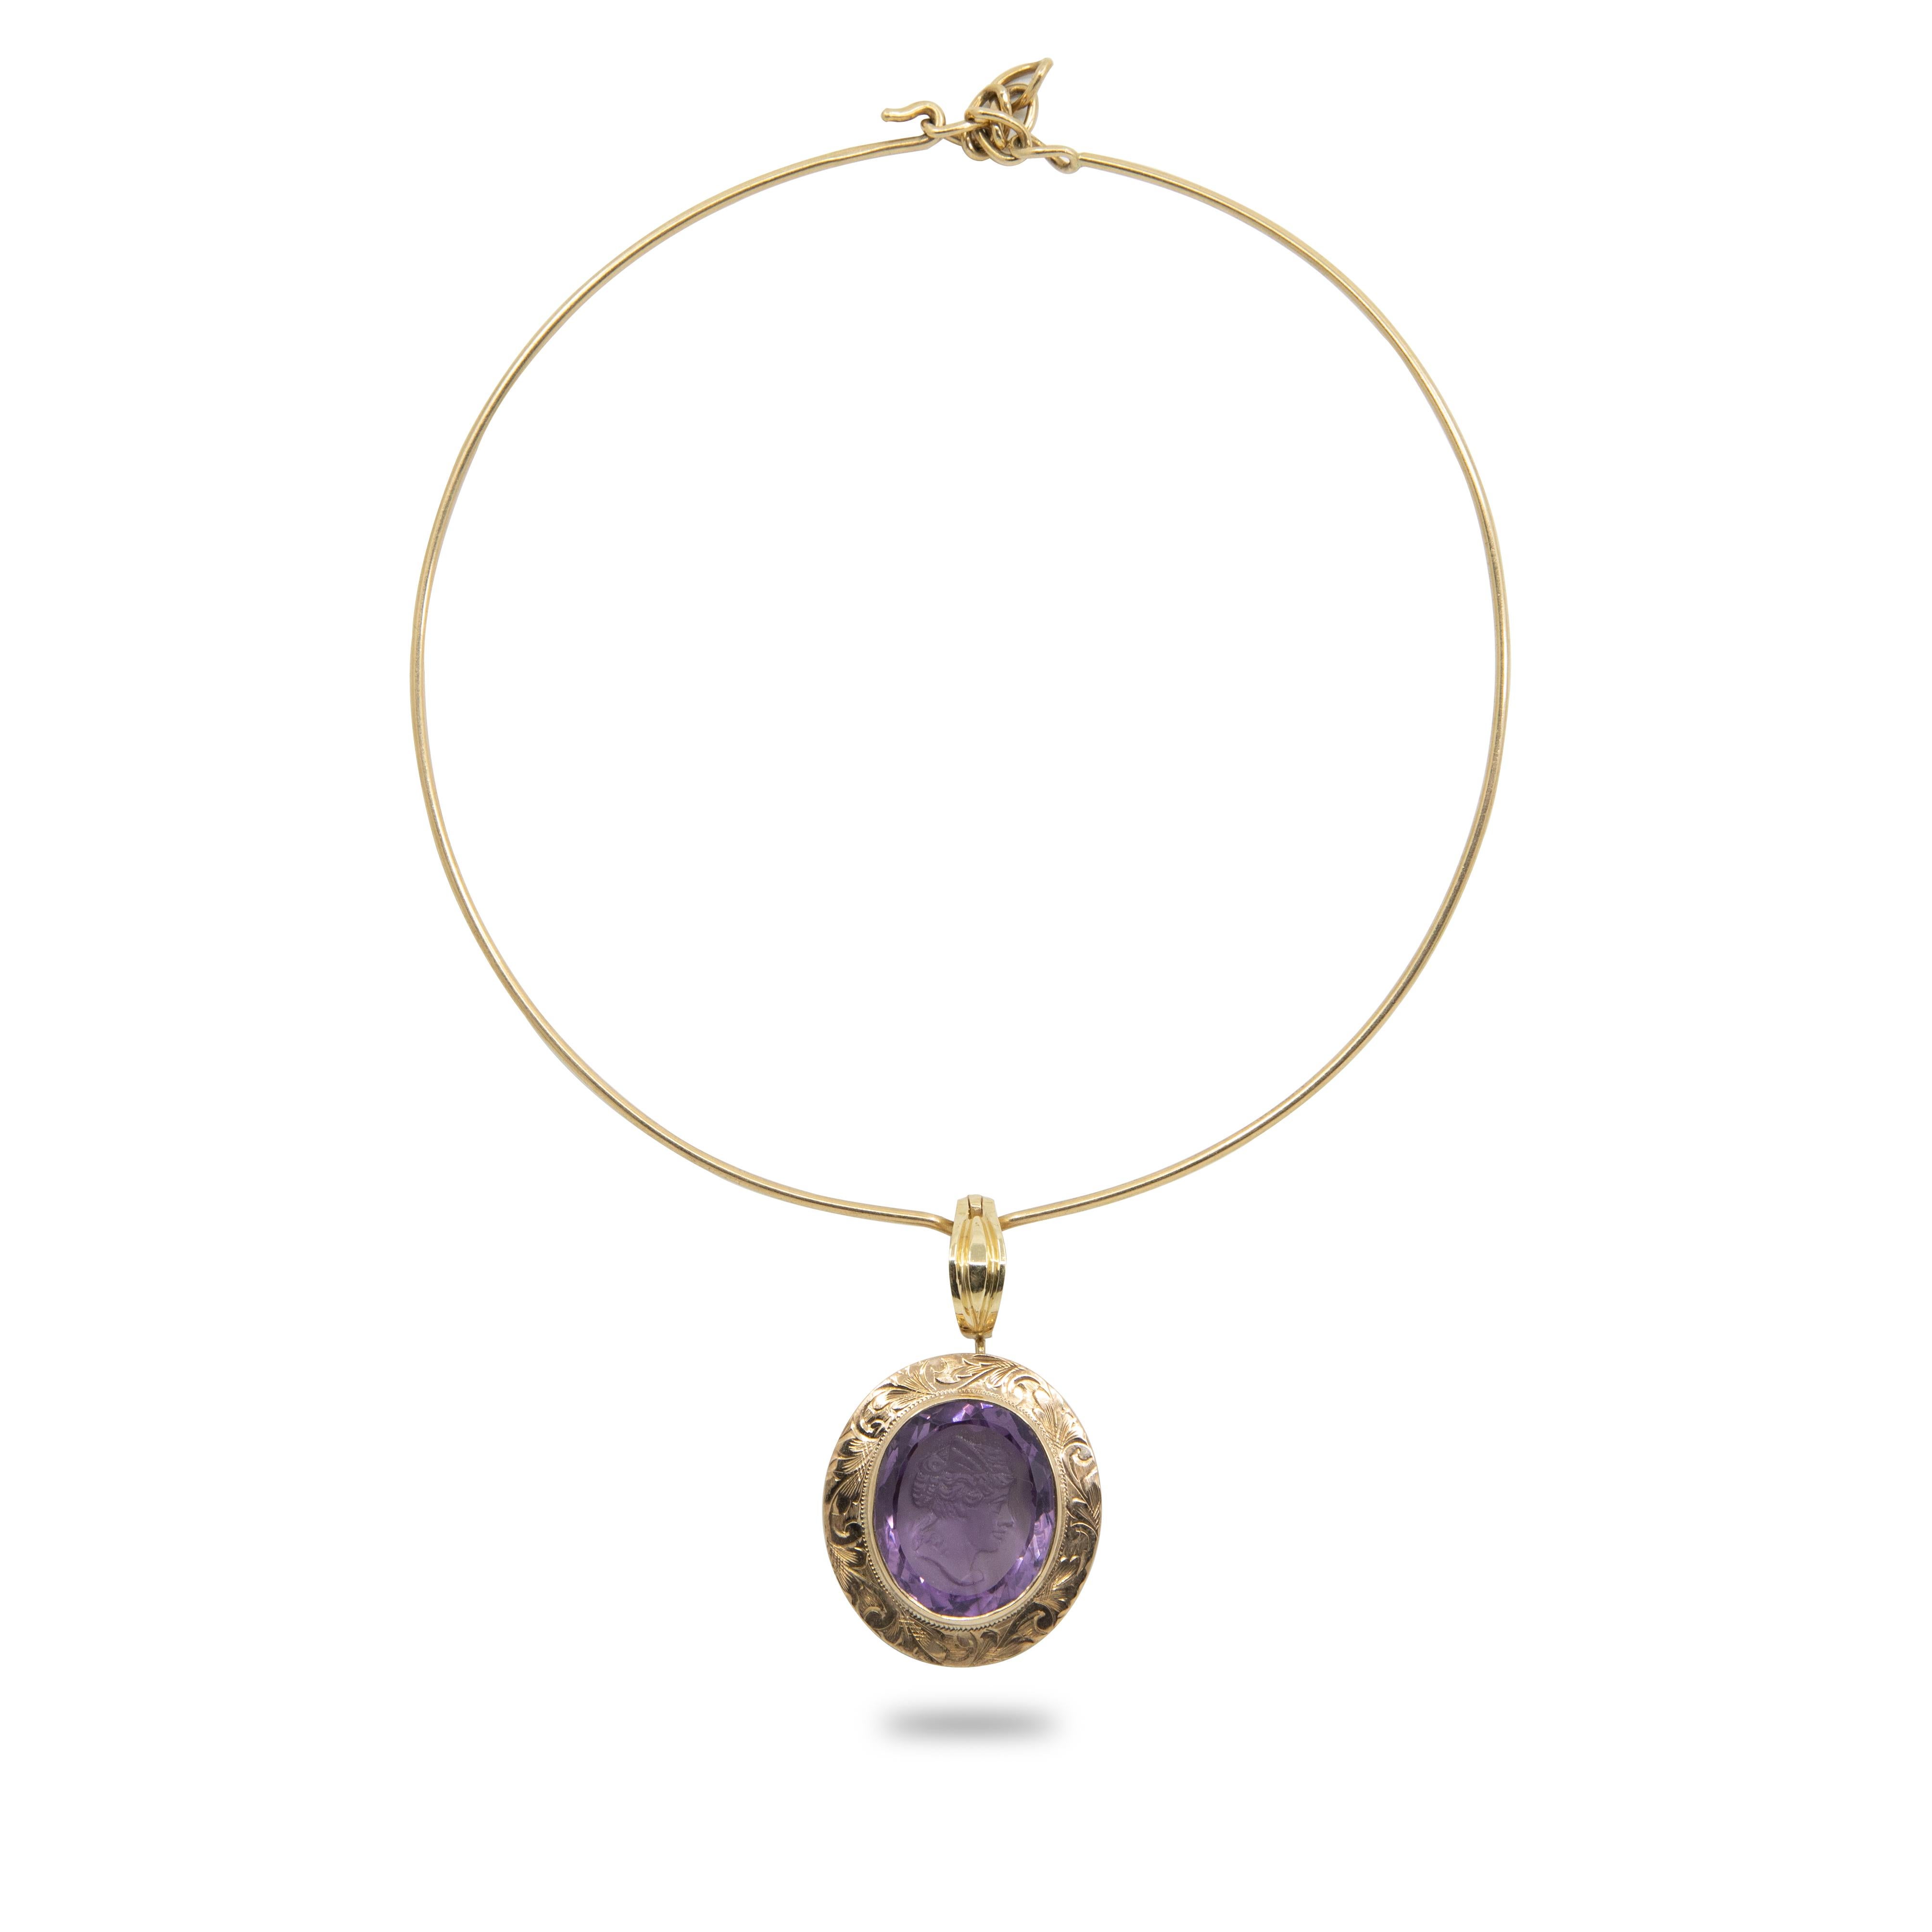 Offered is a 14K and 10K gold amethyst cameo necklace, 18.7dwt. This exquisite intaglio is masterfully engraved onto Amethyst and is set in a 14K Gold Pendant that hangs on a 10K Gold Necklace. 